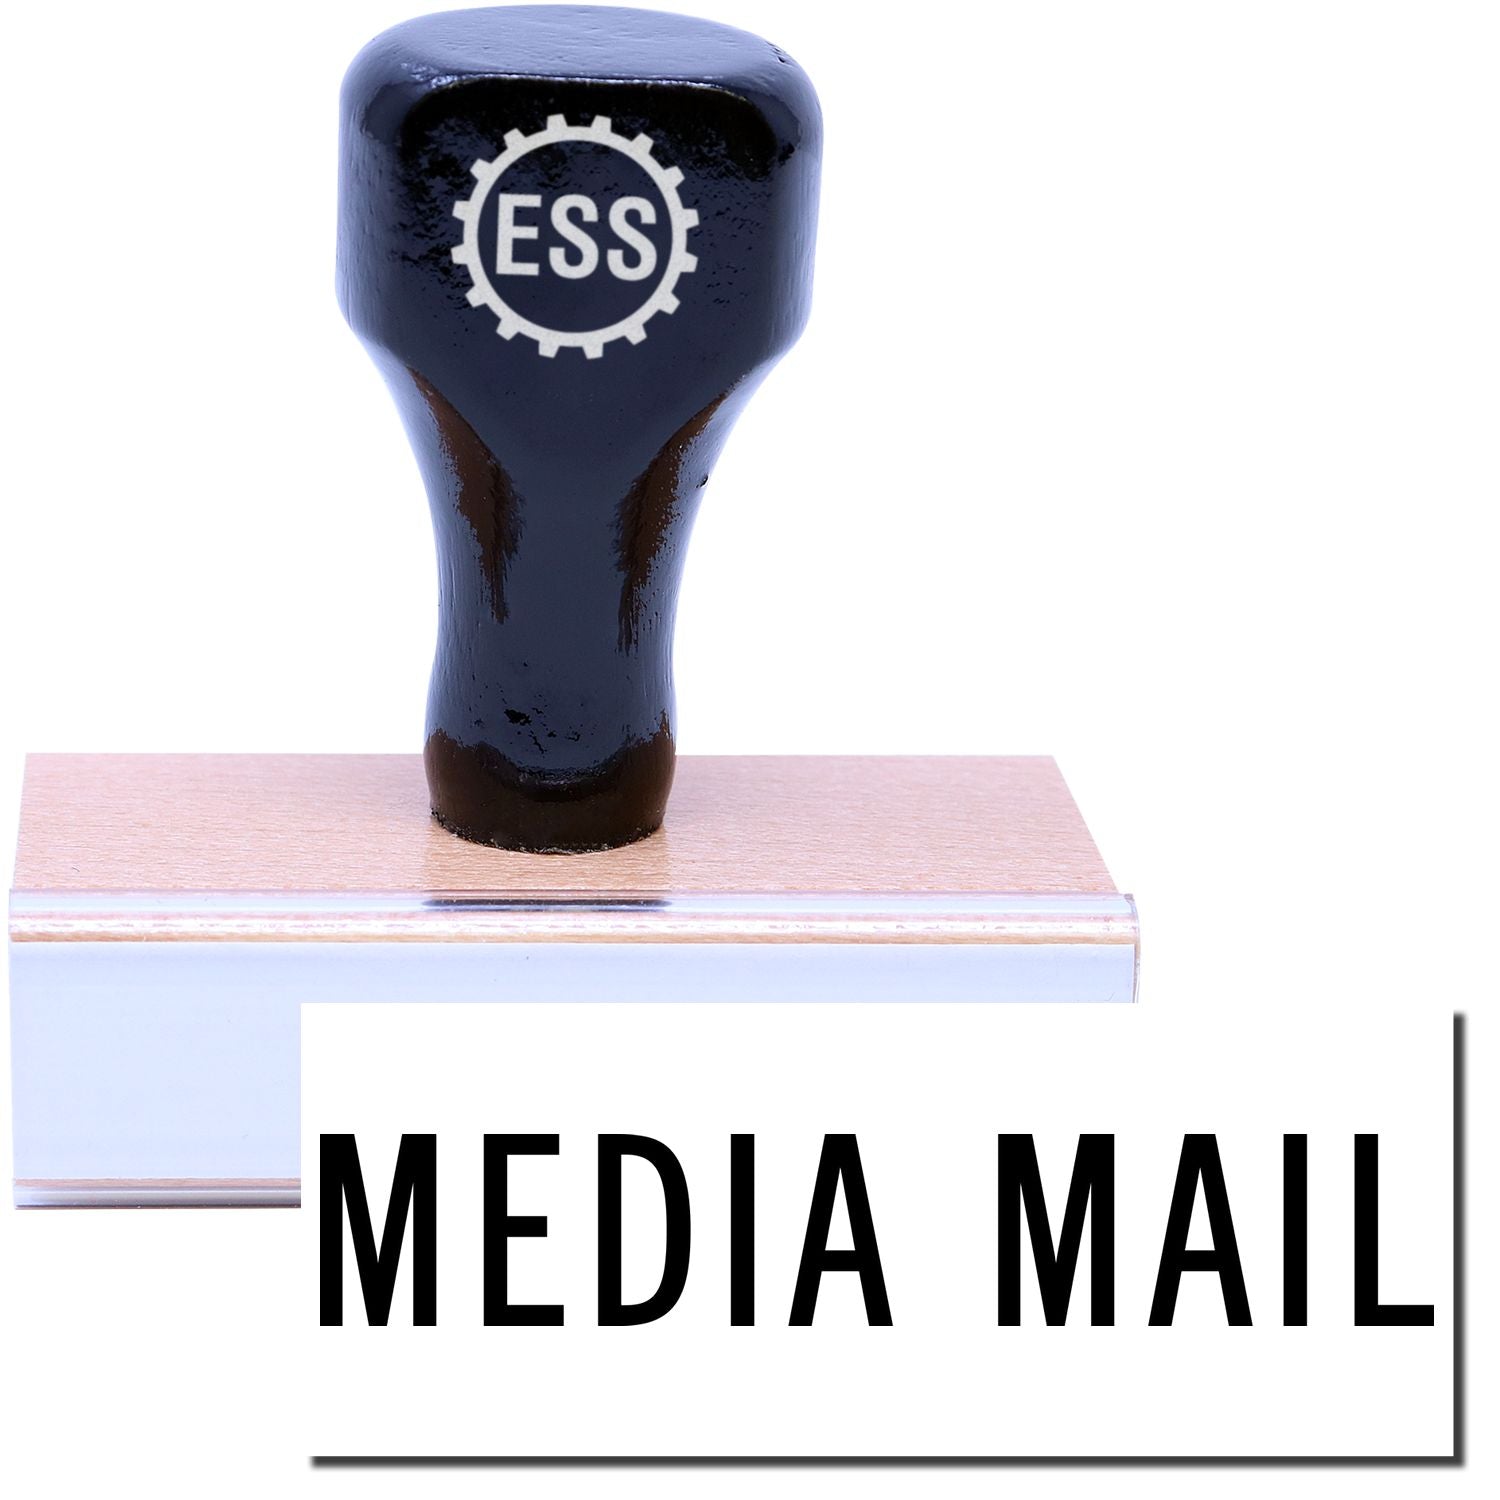 A stock office rubber stamp with a stamped image showing how the text "MEDIA MAIL" is displayed after stamping.